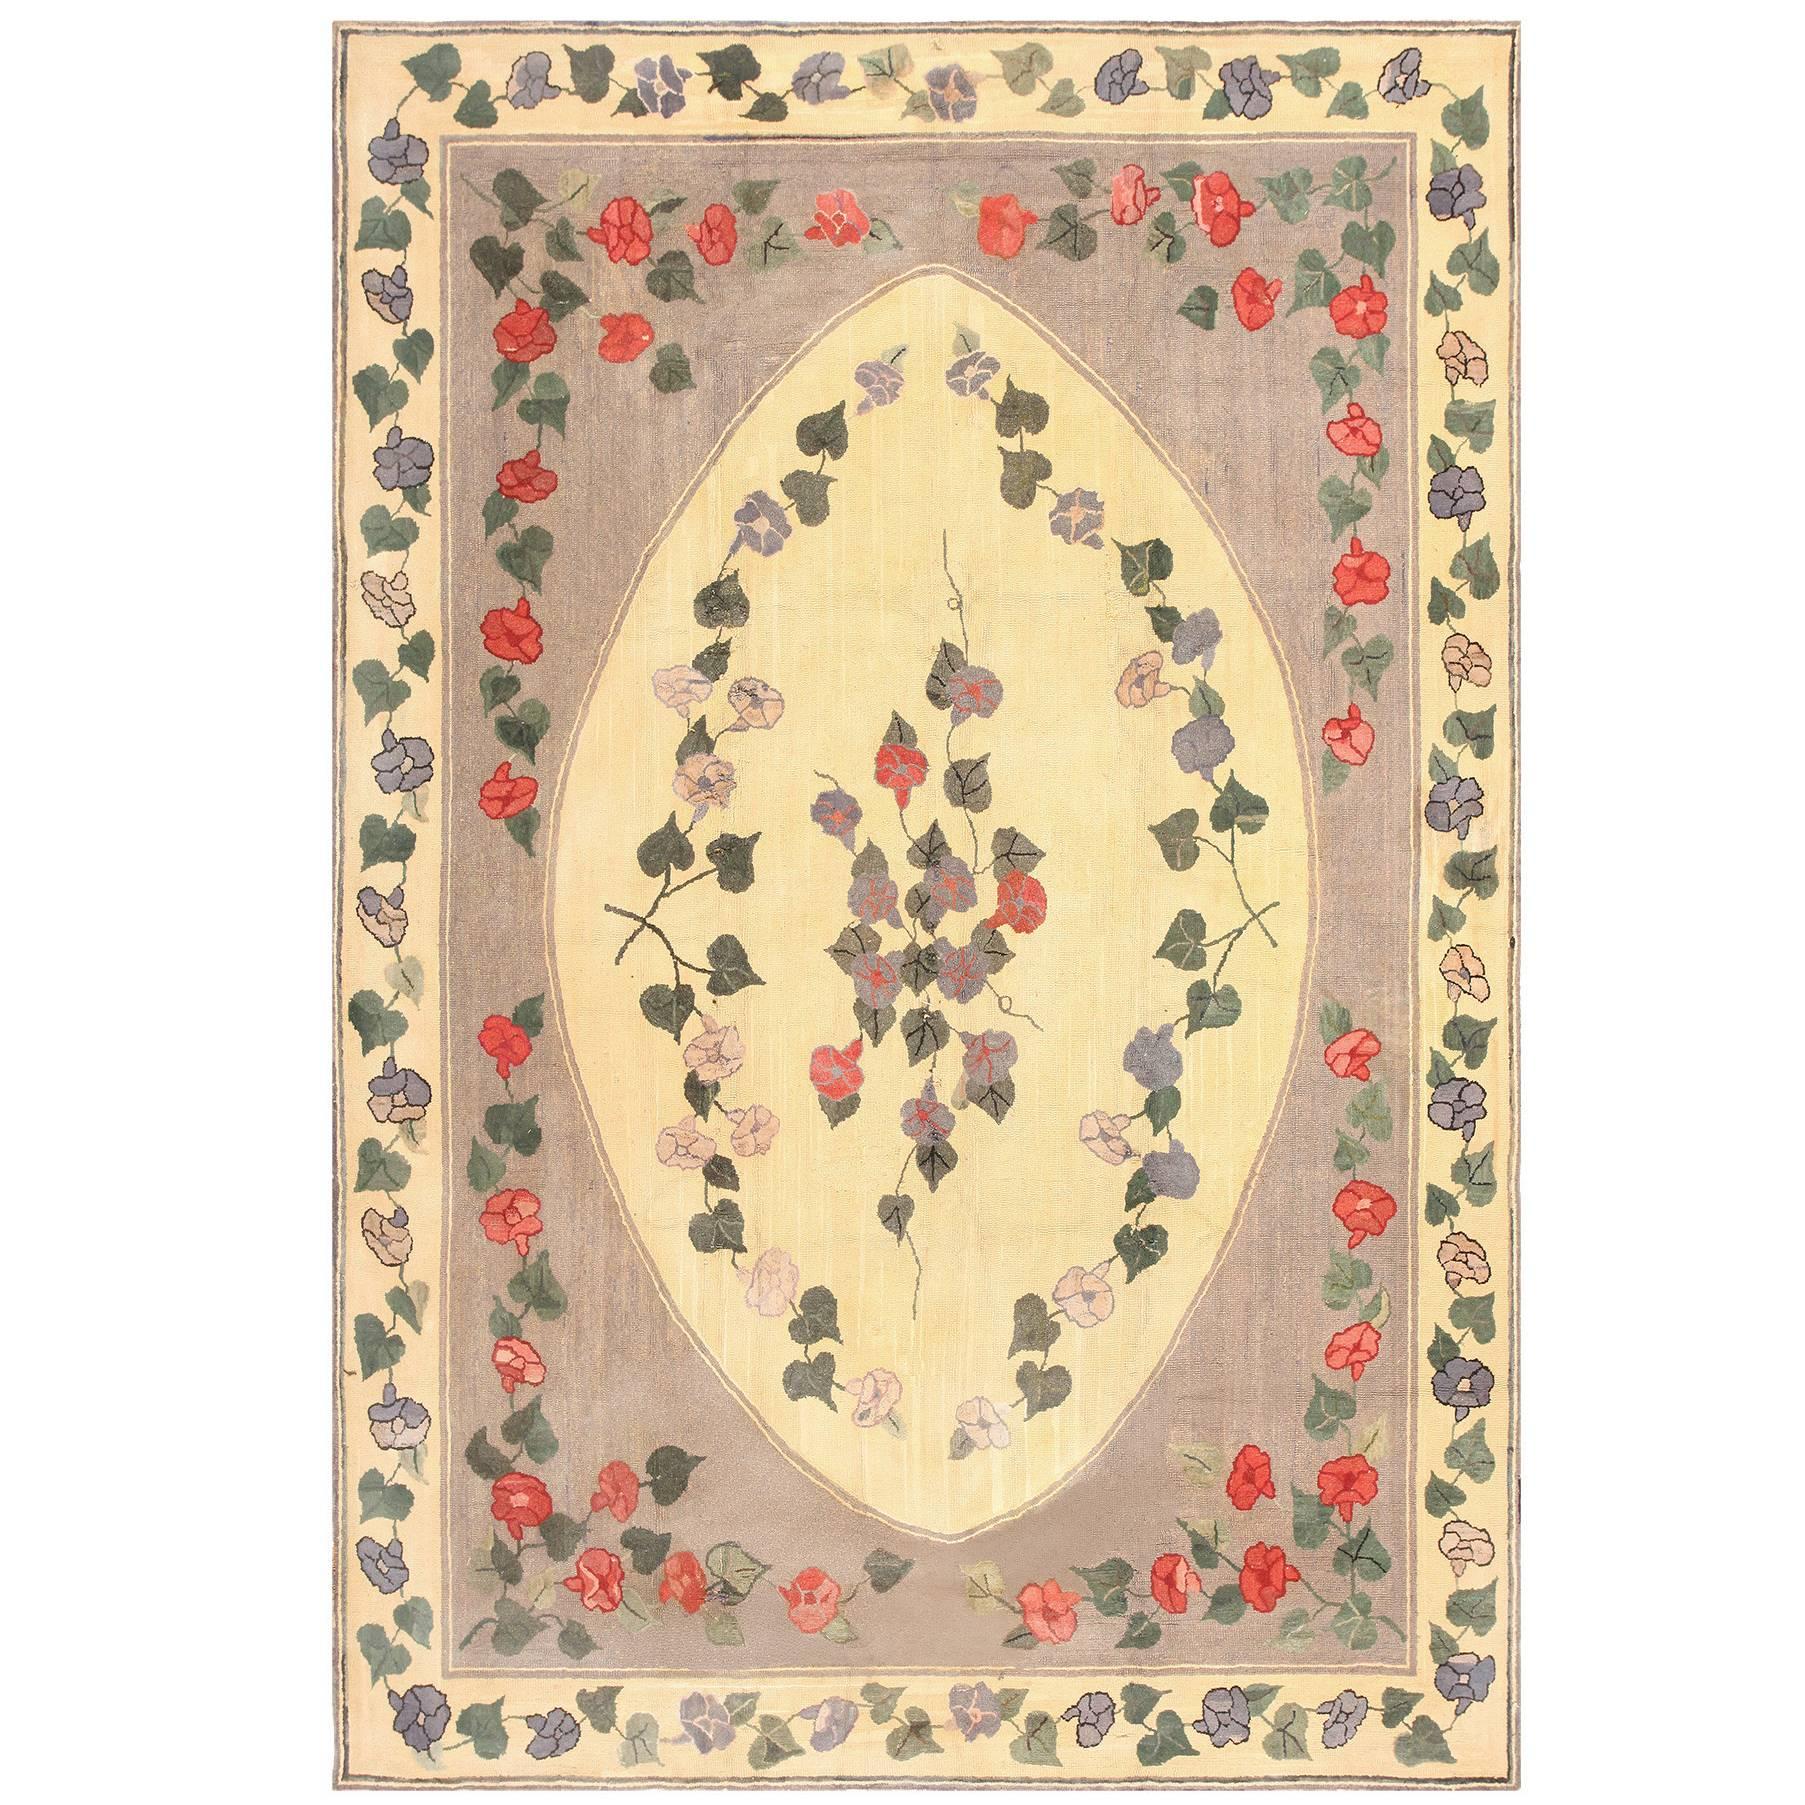 Botanical Room Size Antique American Hooked Rug. Size: 8 ft 2 in x 12 ft 6 in